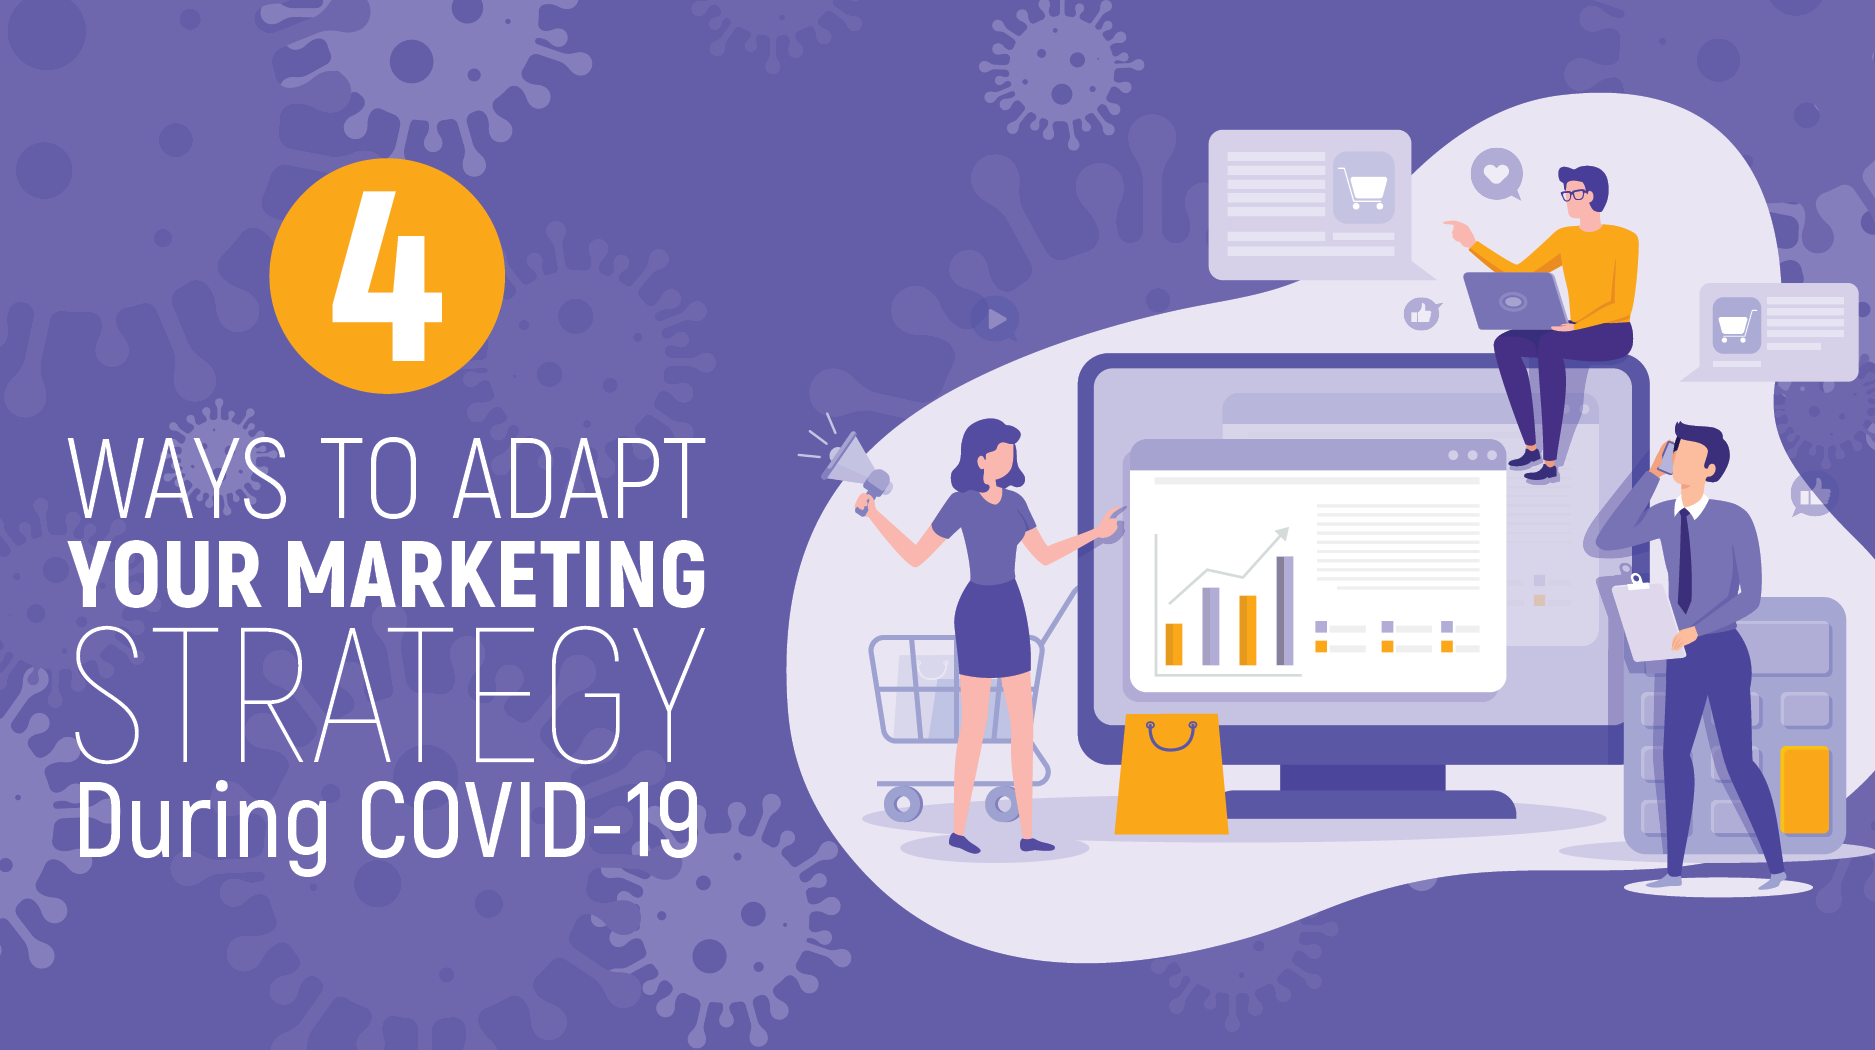 Adapt Your Marketing Strategy During COVID-19